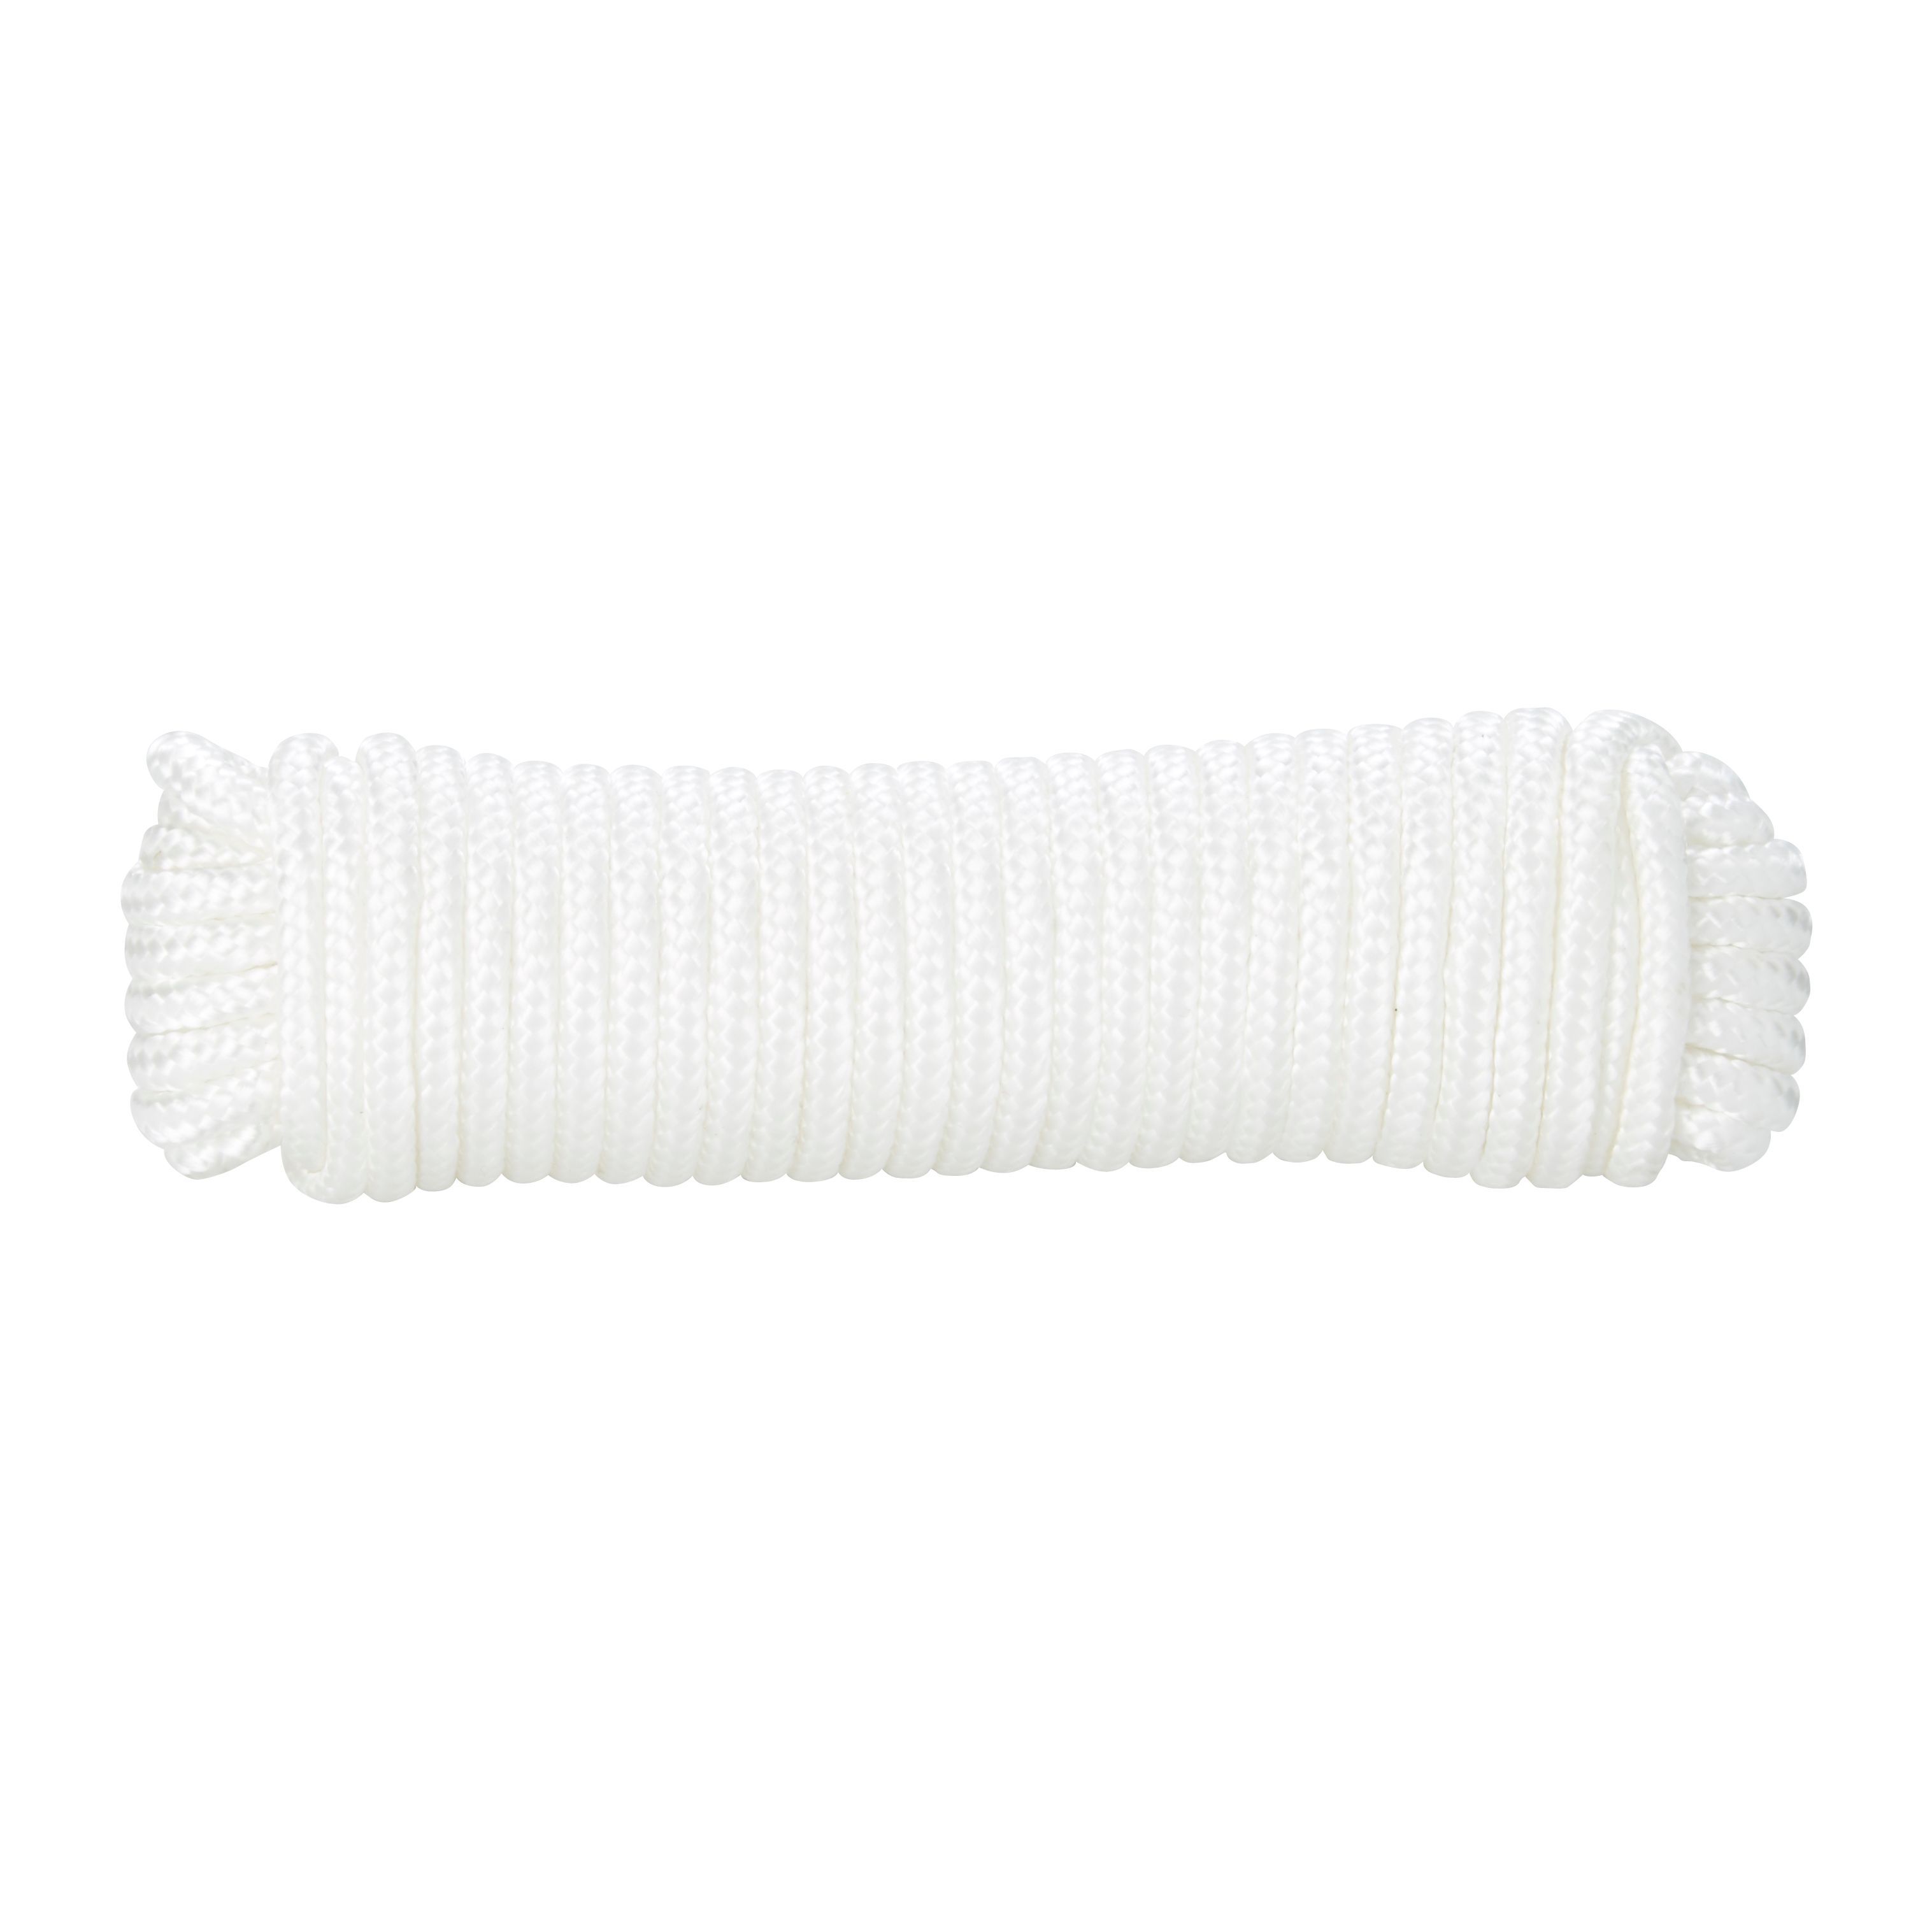 White PVC Ropes, bungees, straps & chains, Hardware